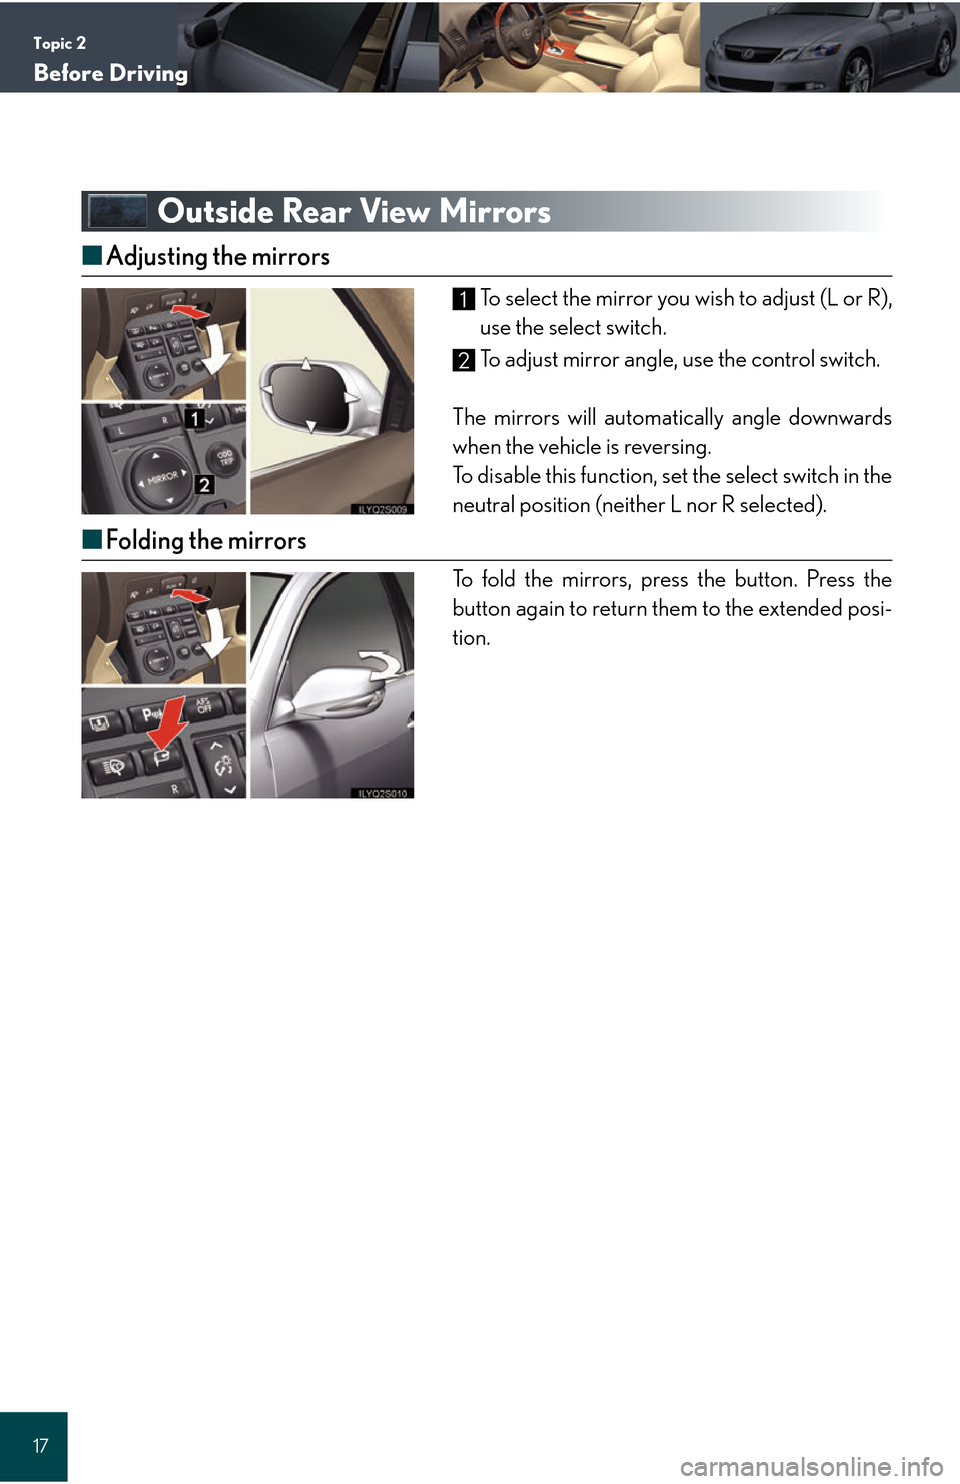 Lexus GS450h 2008  Scheduled Maintenace Guide / LEXUS 2008 GS450H QUICK GUIDE  (OM30B13U) User Guide Topic 2
Before Driving
17
Outside Rear View Mirrors
■Adjusting the mirrors
To select the mirror you wish to adjust (L or R),
use the select switch.
To adjust mirror angle, use the control switch.
Th